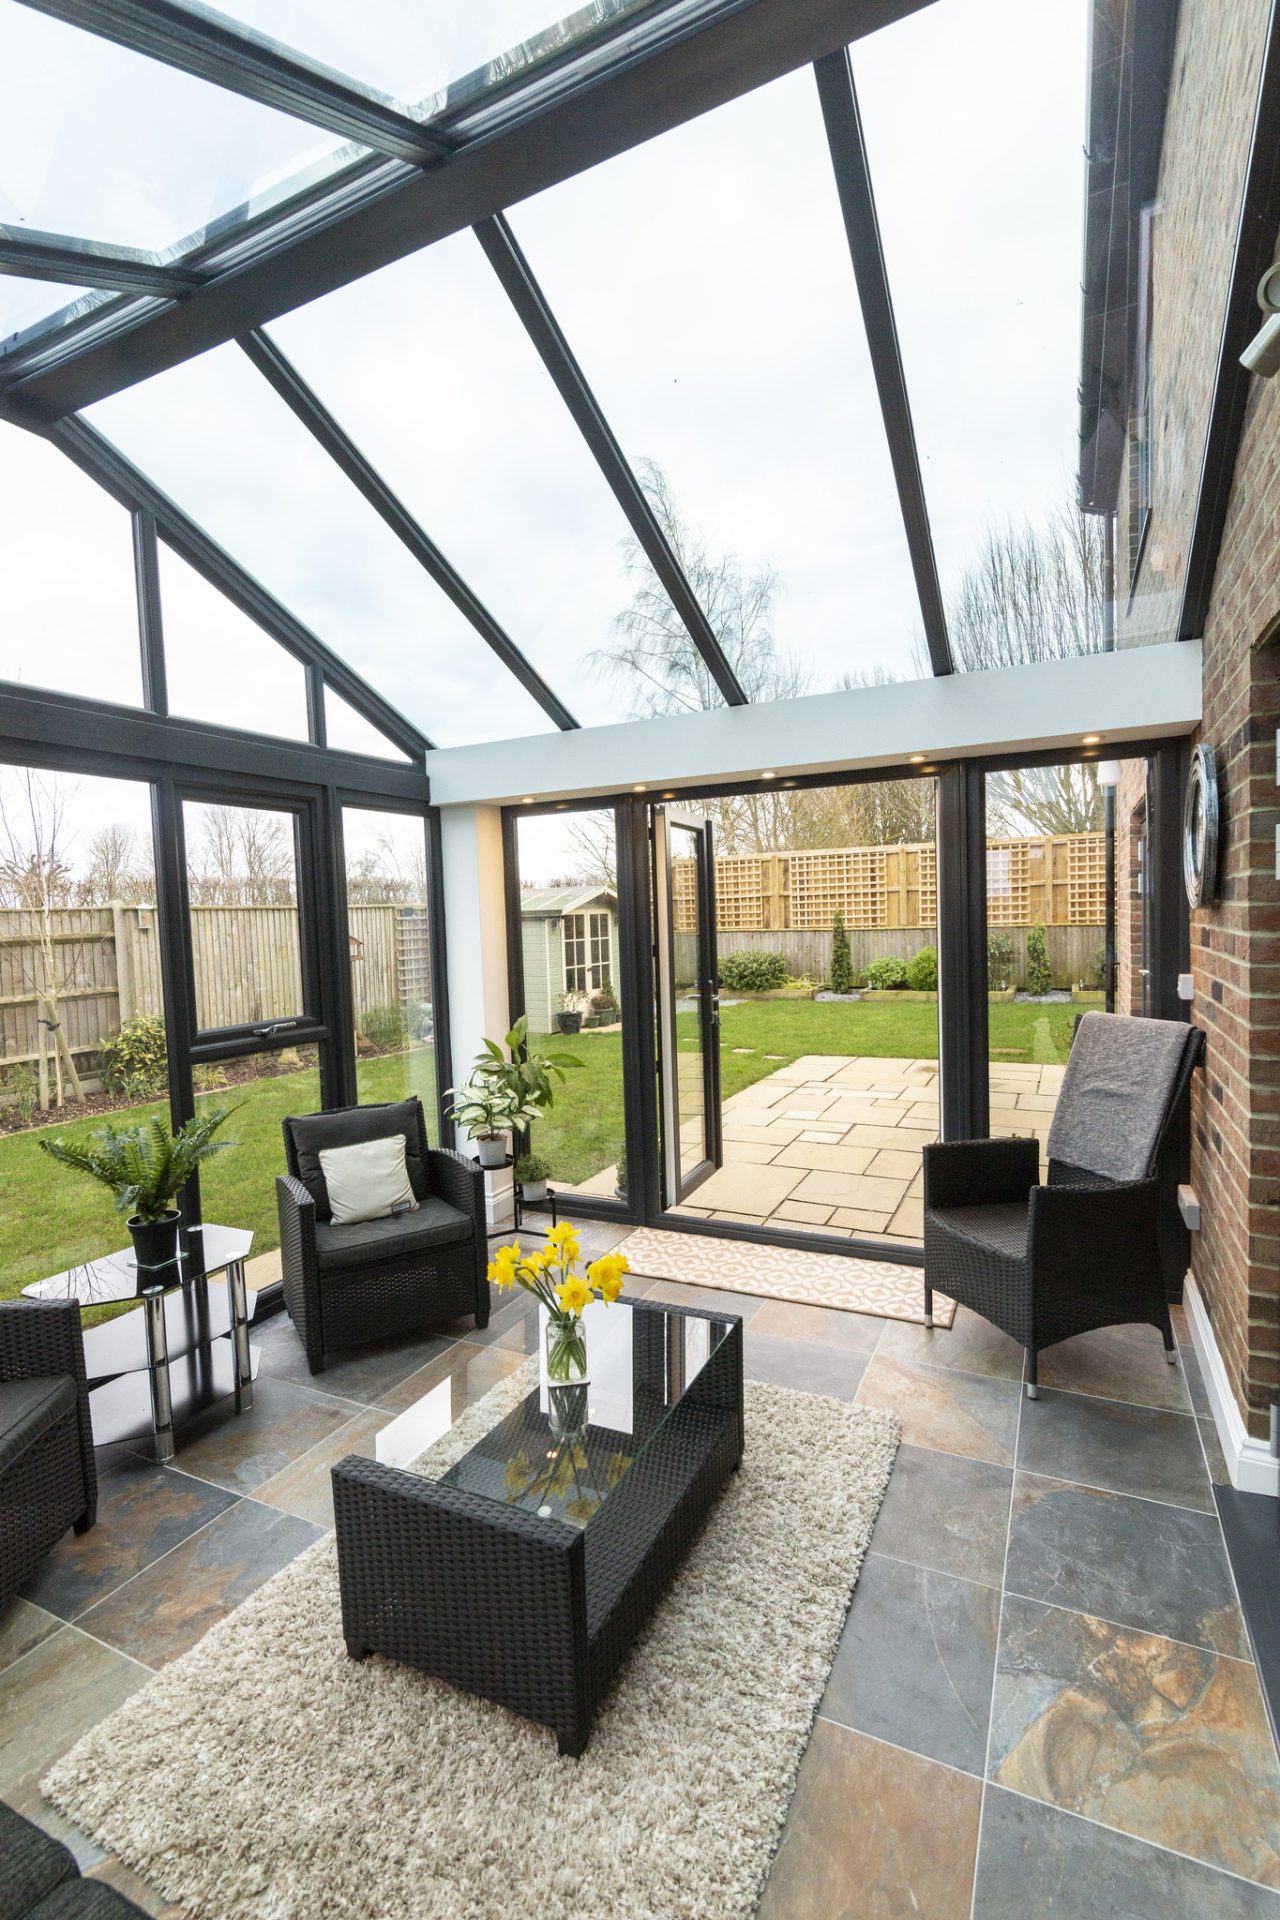 Glass roof conservatory with table in the centre of the room